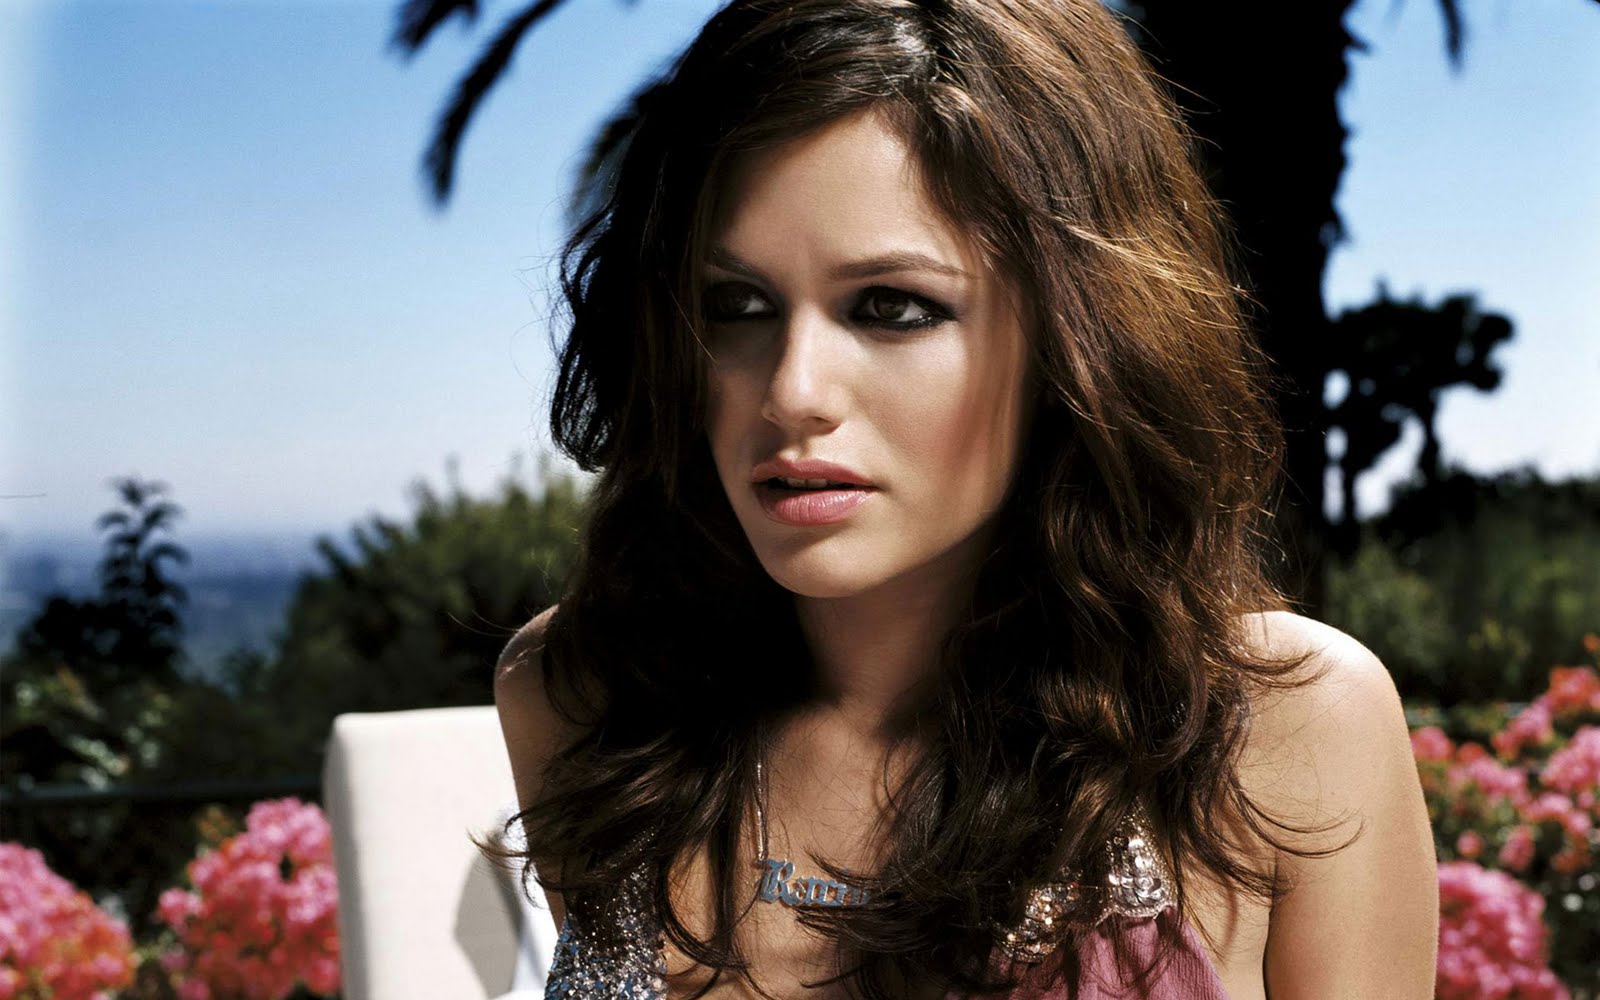 Rachel Bilson Pictures & Wallpapers | Hollywood Actress Wallpapers | HD Celebrity ...1600 x 1000